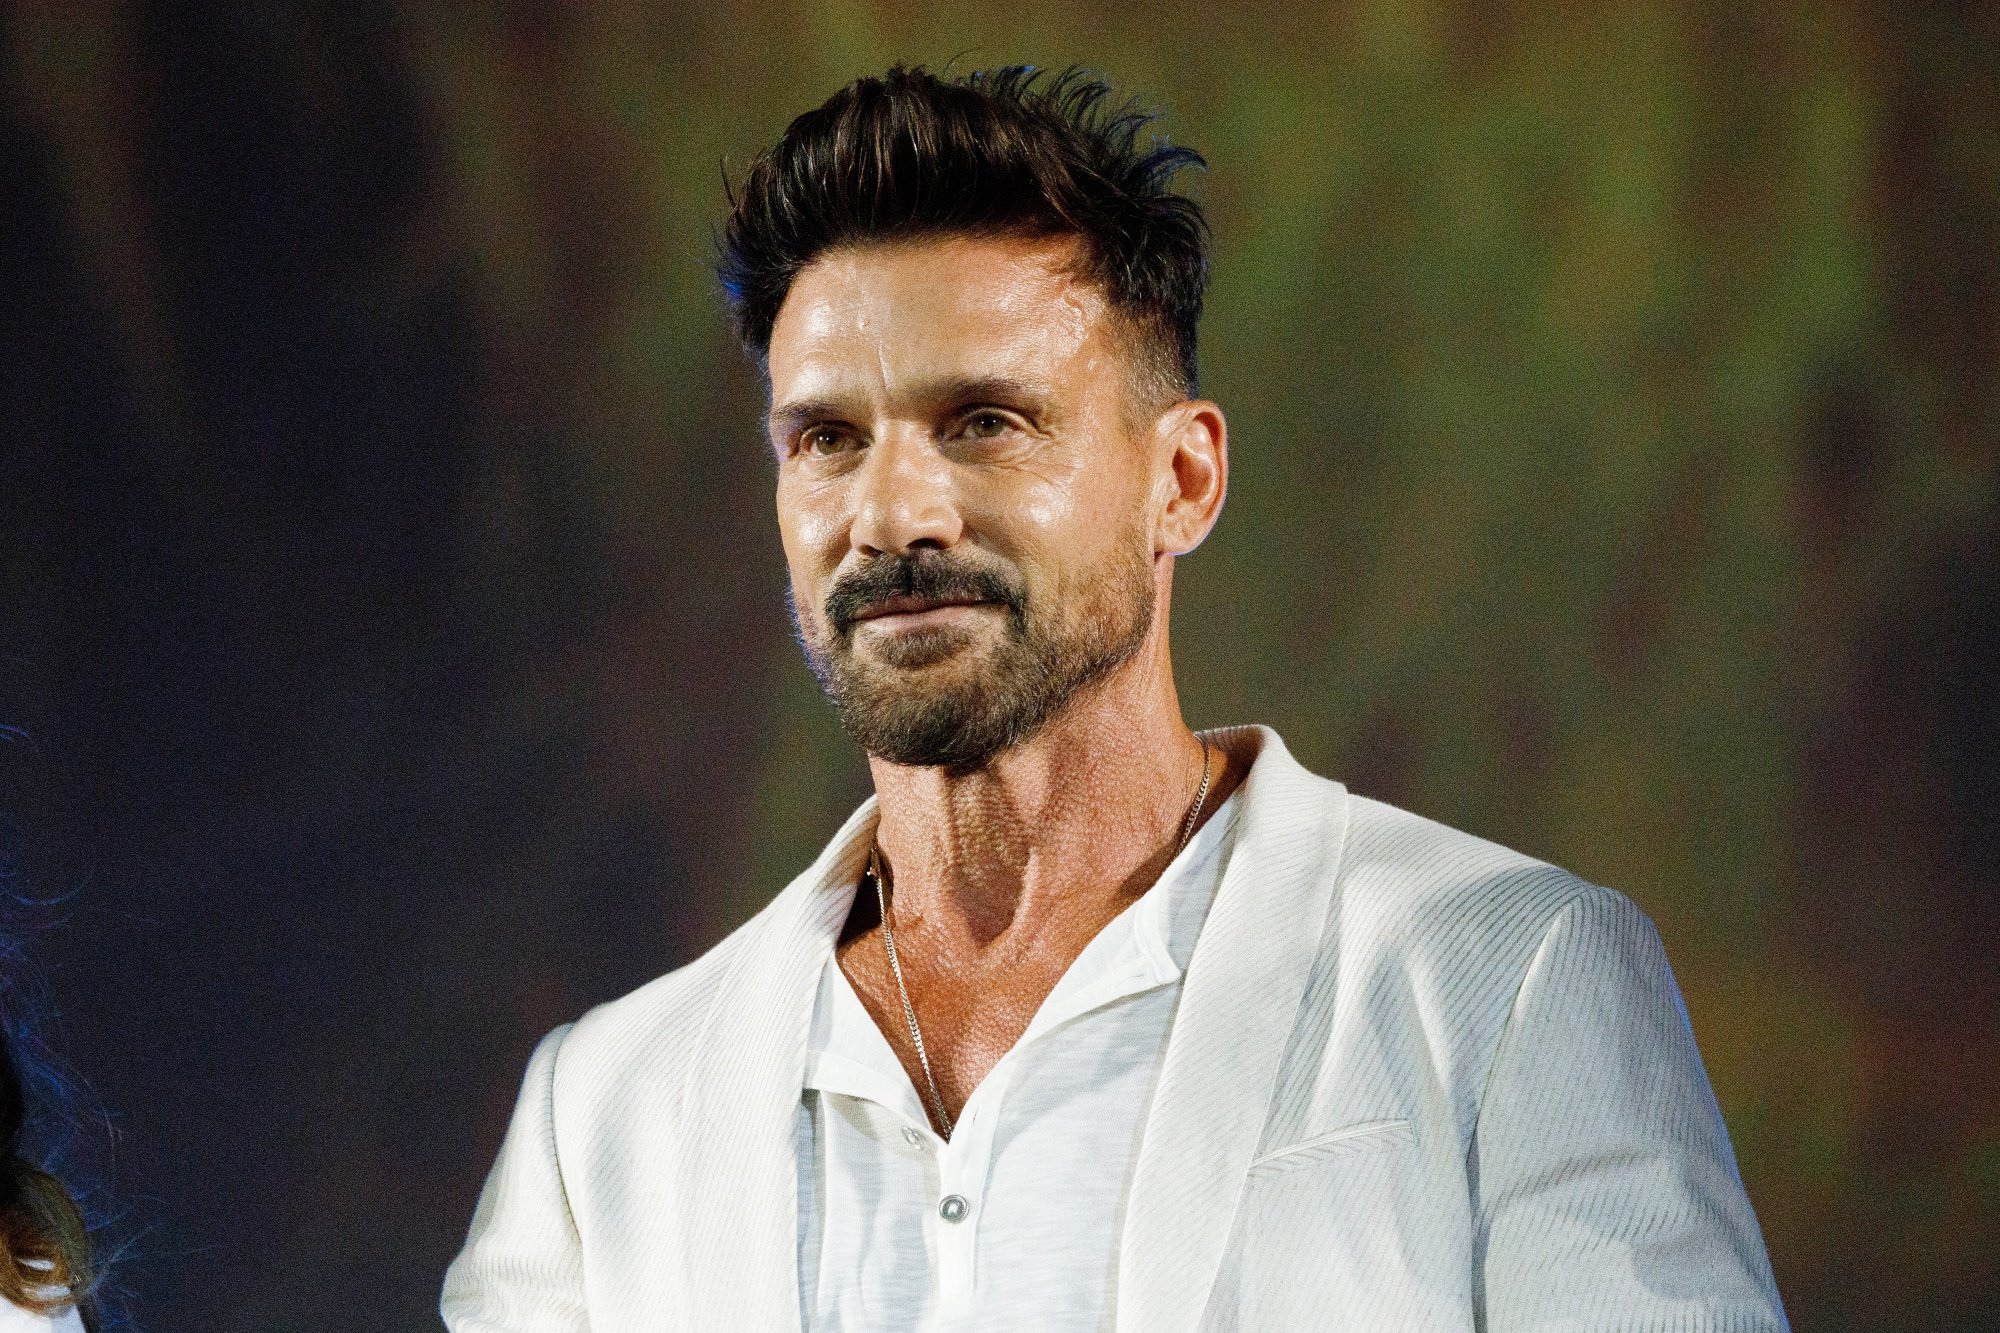 'Copshop' star Frank Grillo wearing a white suit during the Awards Winner Ceremony of the 74th Locarno Film Festival